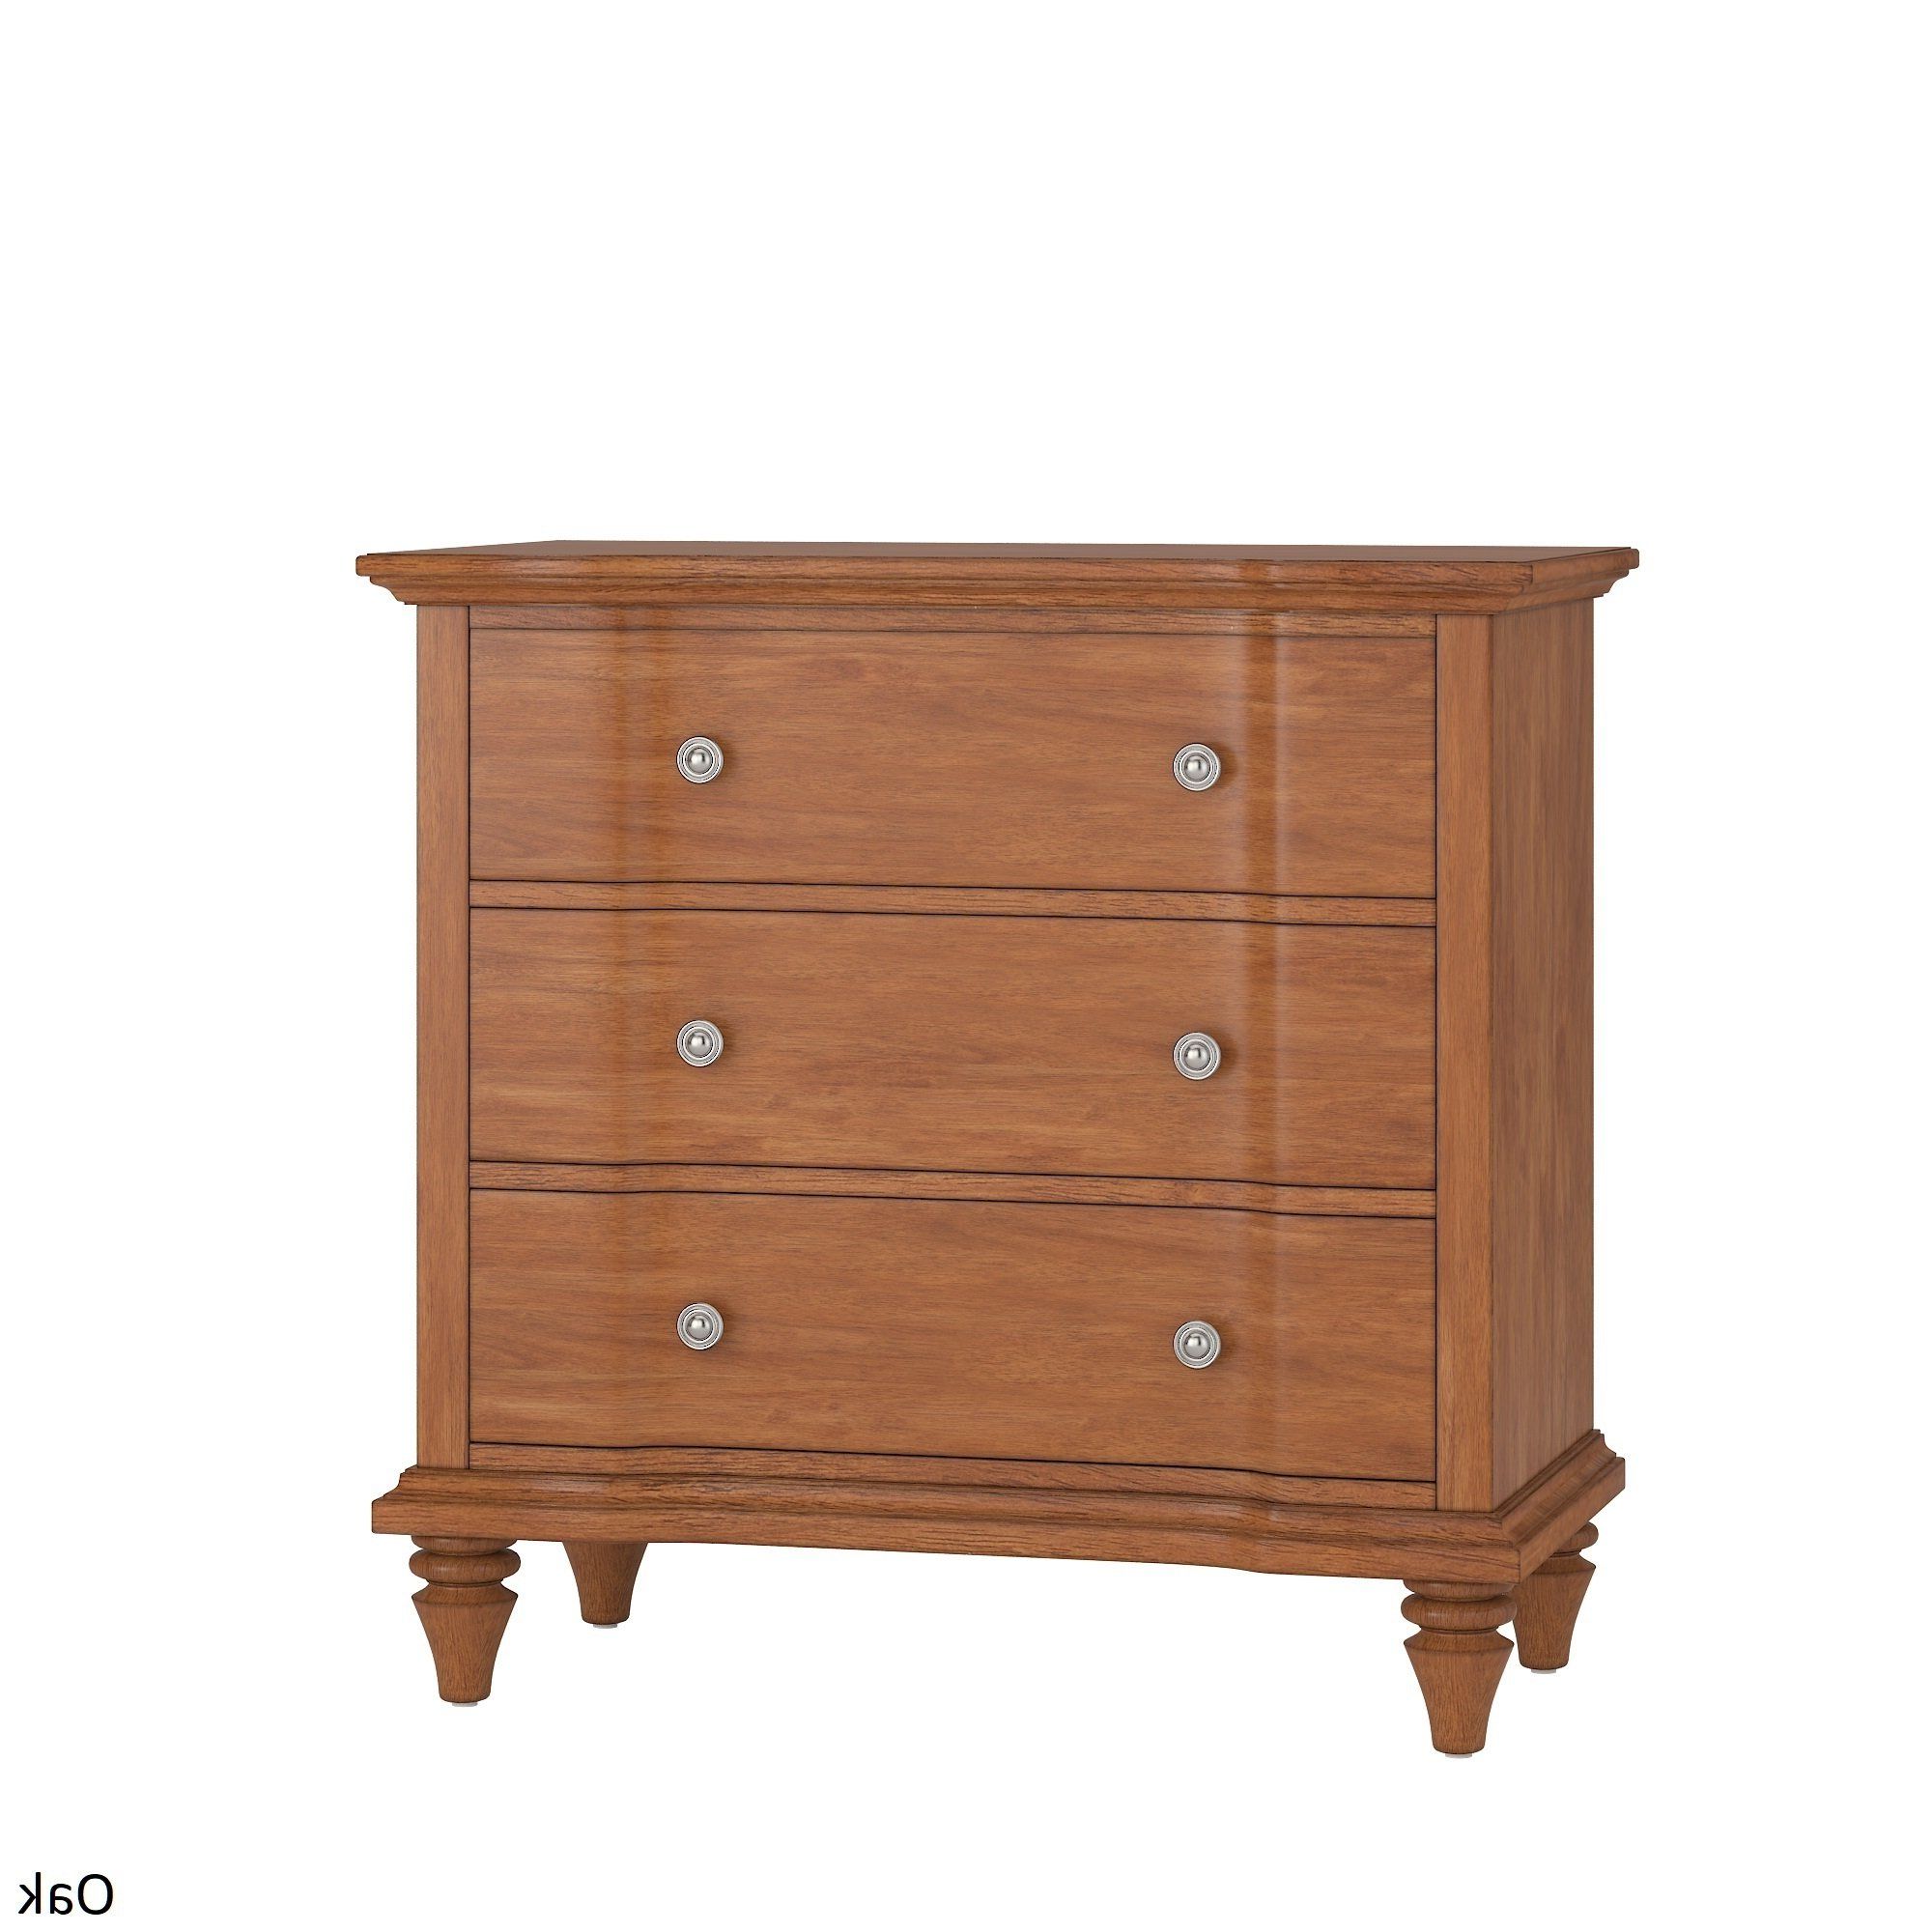 Well Liked Light Brown Reclaimed Elm & Pine 84 Inch Sideboards In Buy Oak Dressers & Chests Online At Overstock (View 19 of 20)